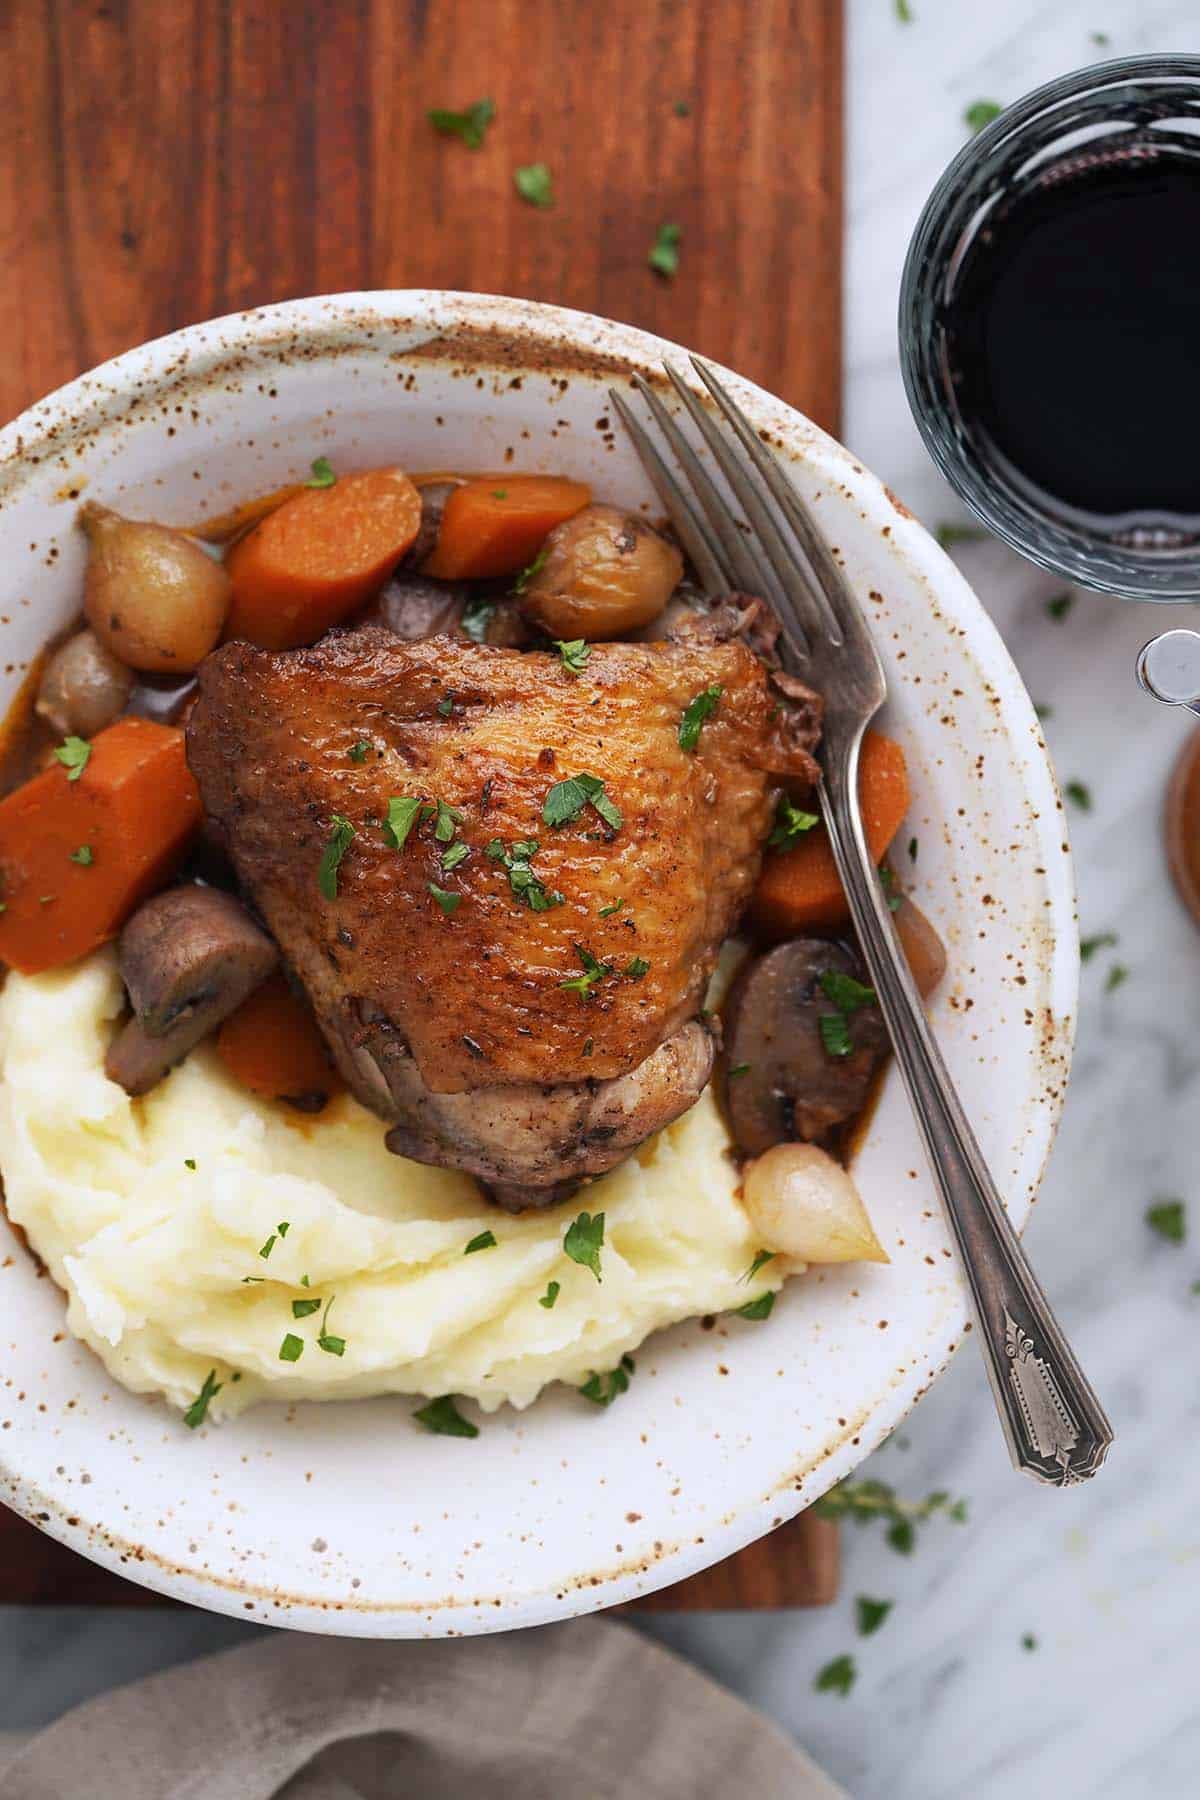 coq au vin in bowl with glass of wine on side